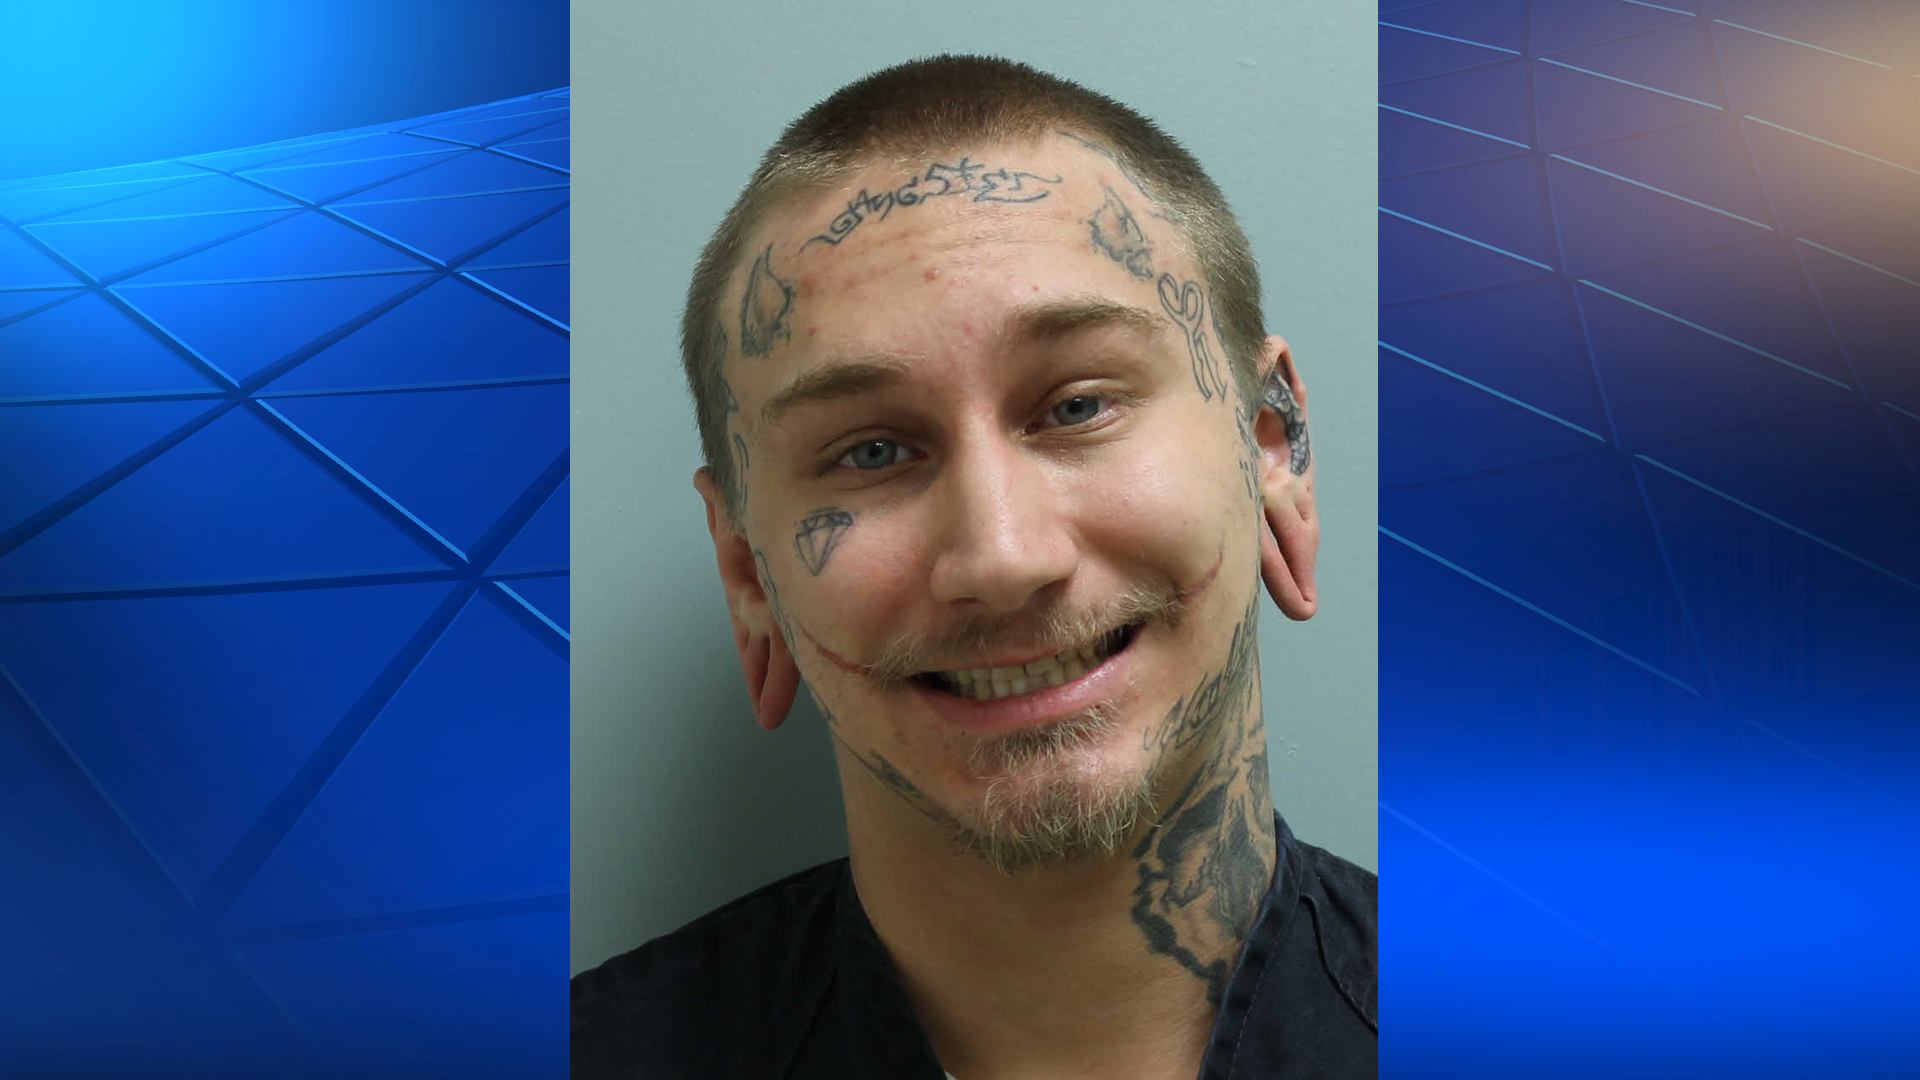 'I sold your soul to the devil.' Pennsylvania man charged after slashing girlfriend during "satanic ritual"